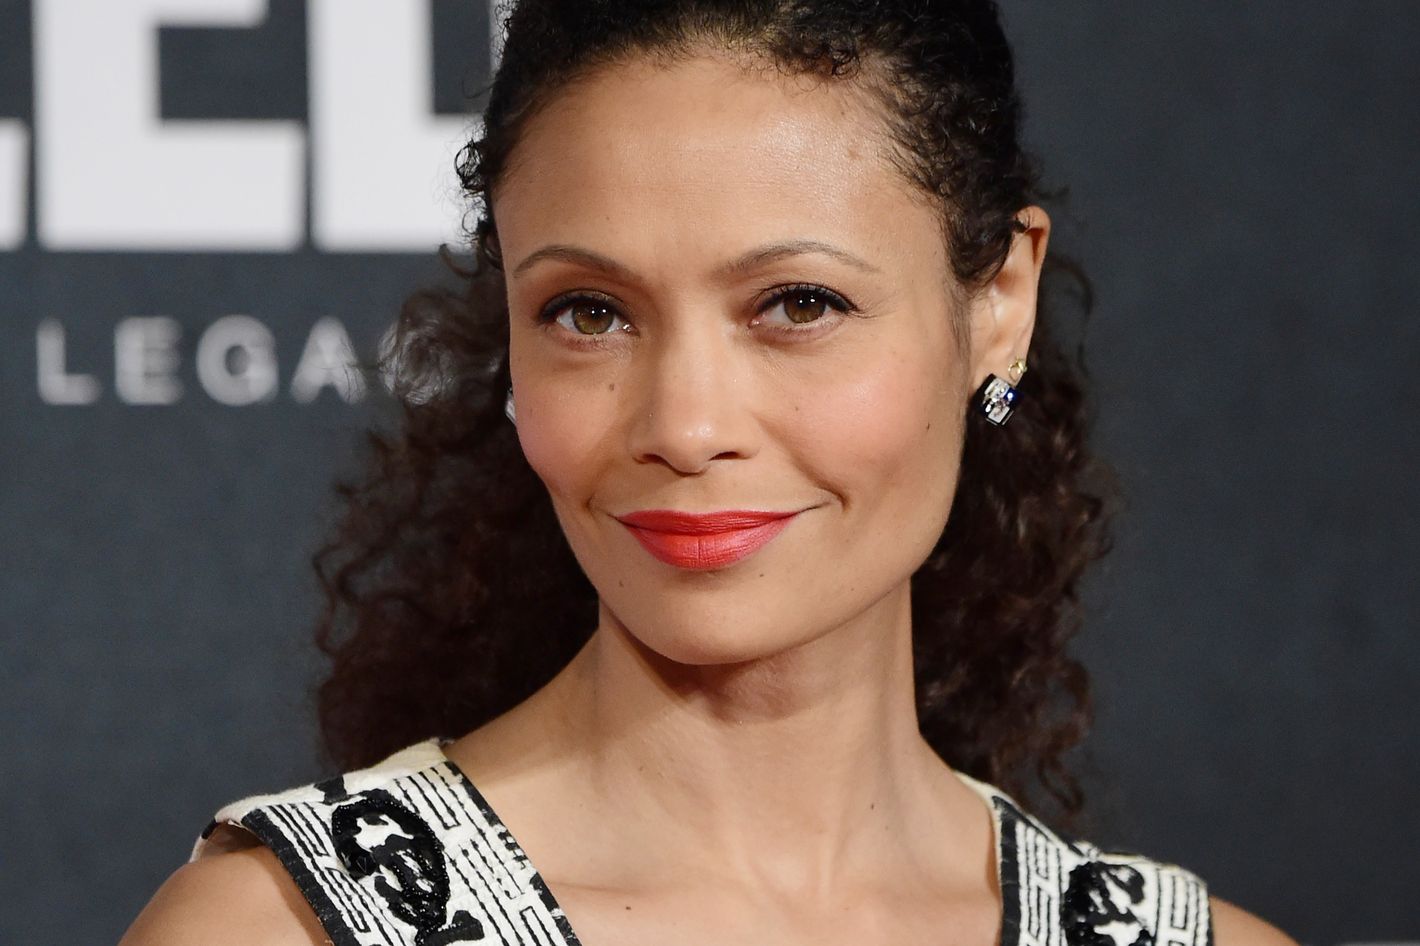 Thandie Newtons Story of Sexual Abuse During an Audition Is Still Horrifying